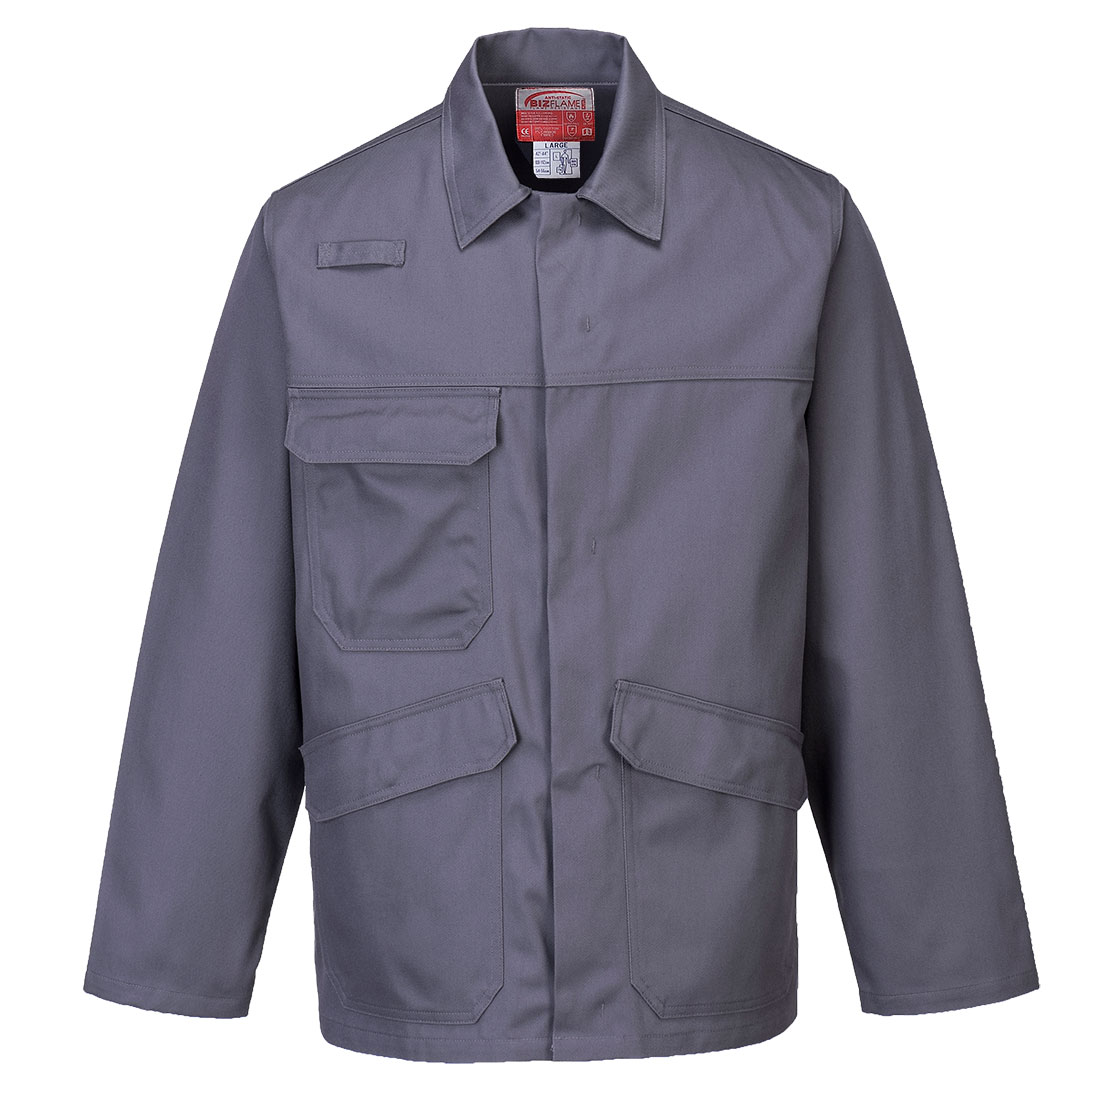 Flame Resistant Durable Classic Jacket with Against Welding Hazards